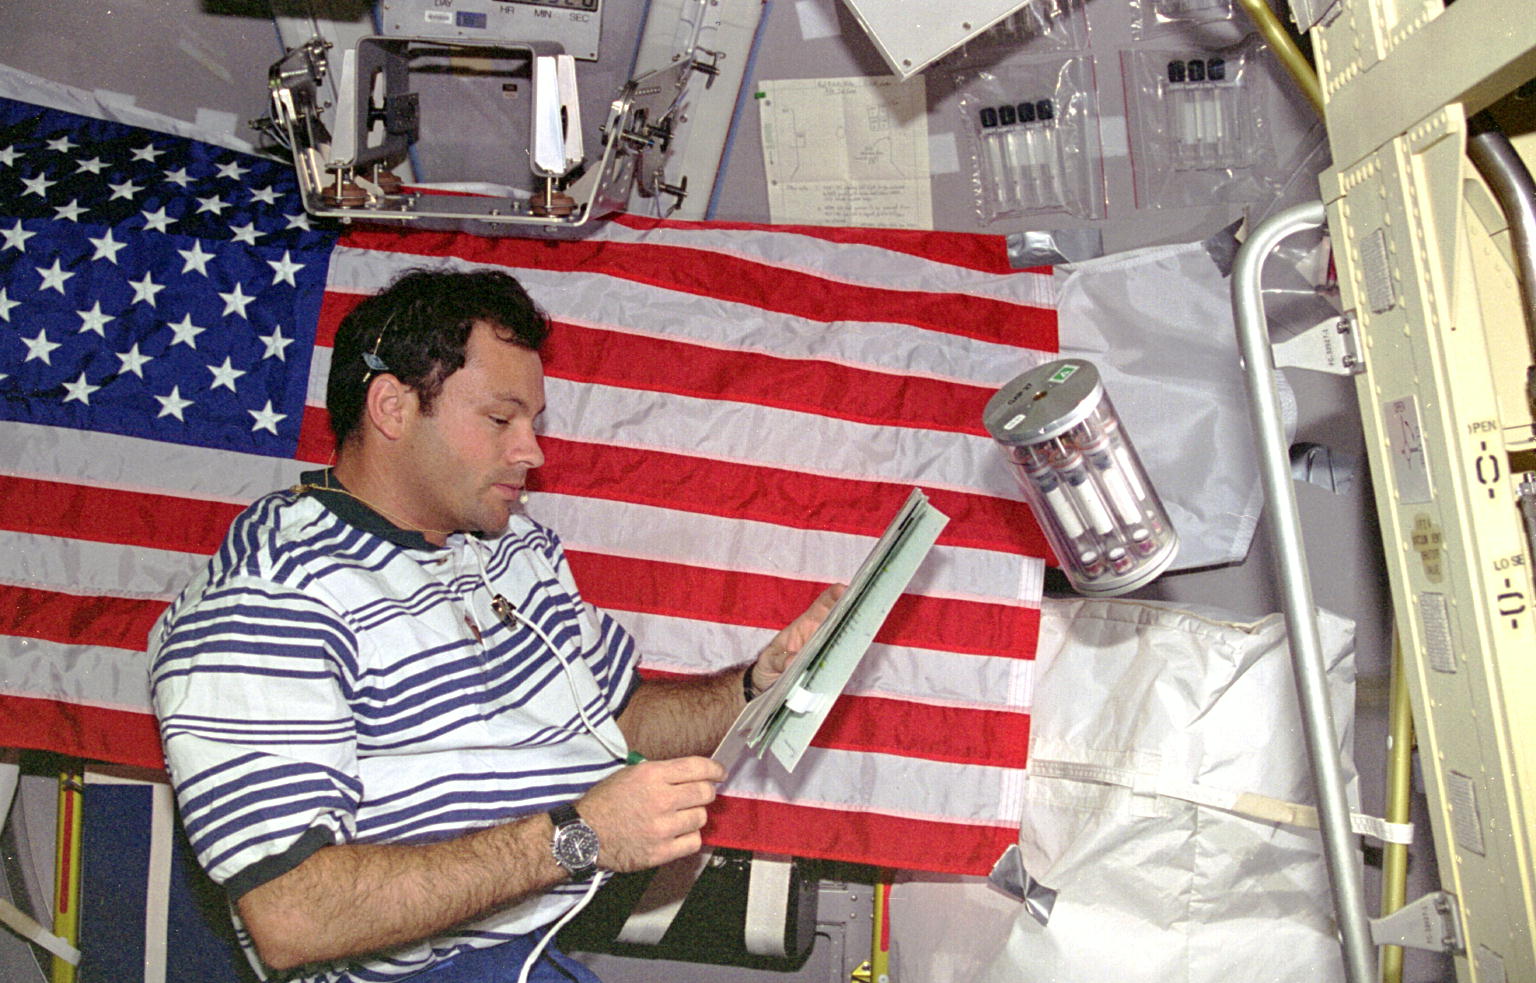 Lopez-Alegria working on biological experiment in the Spacelab module